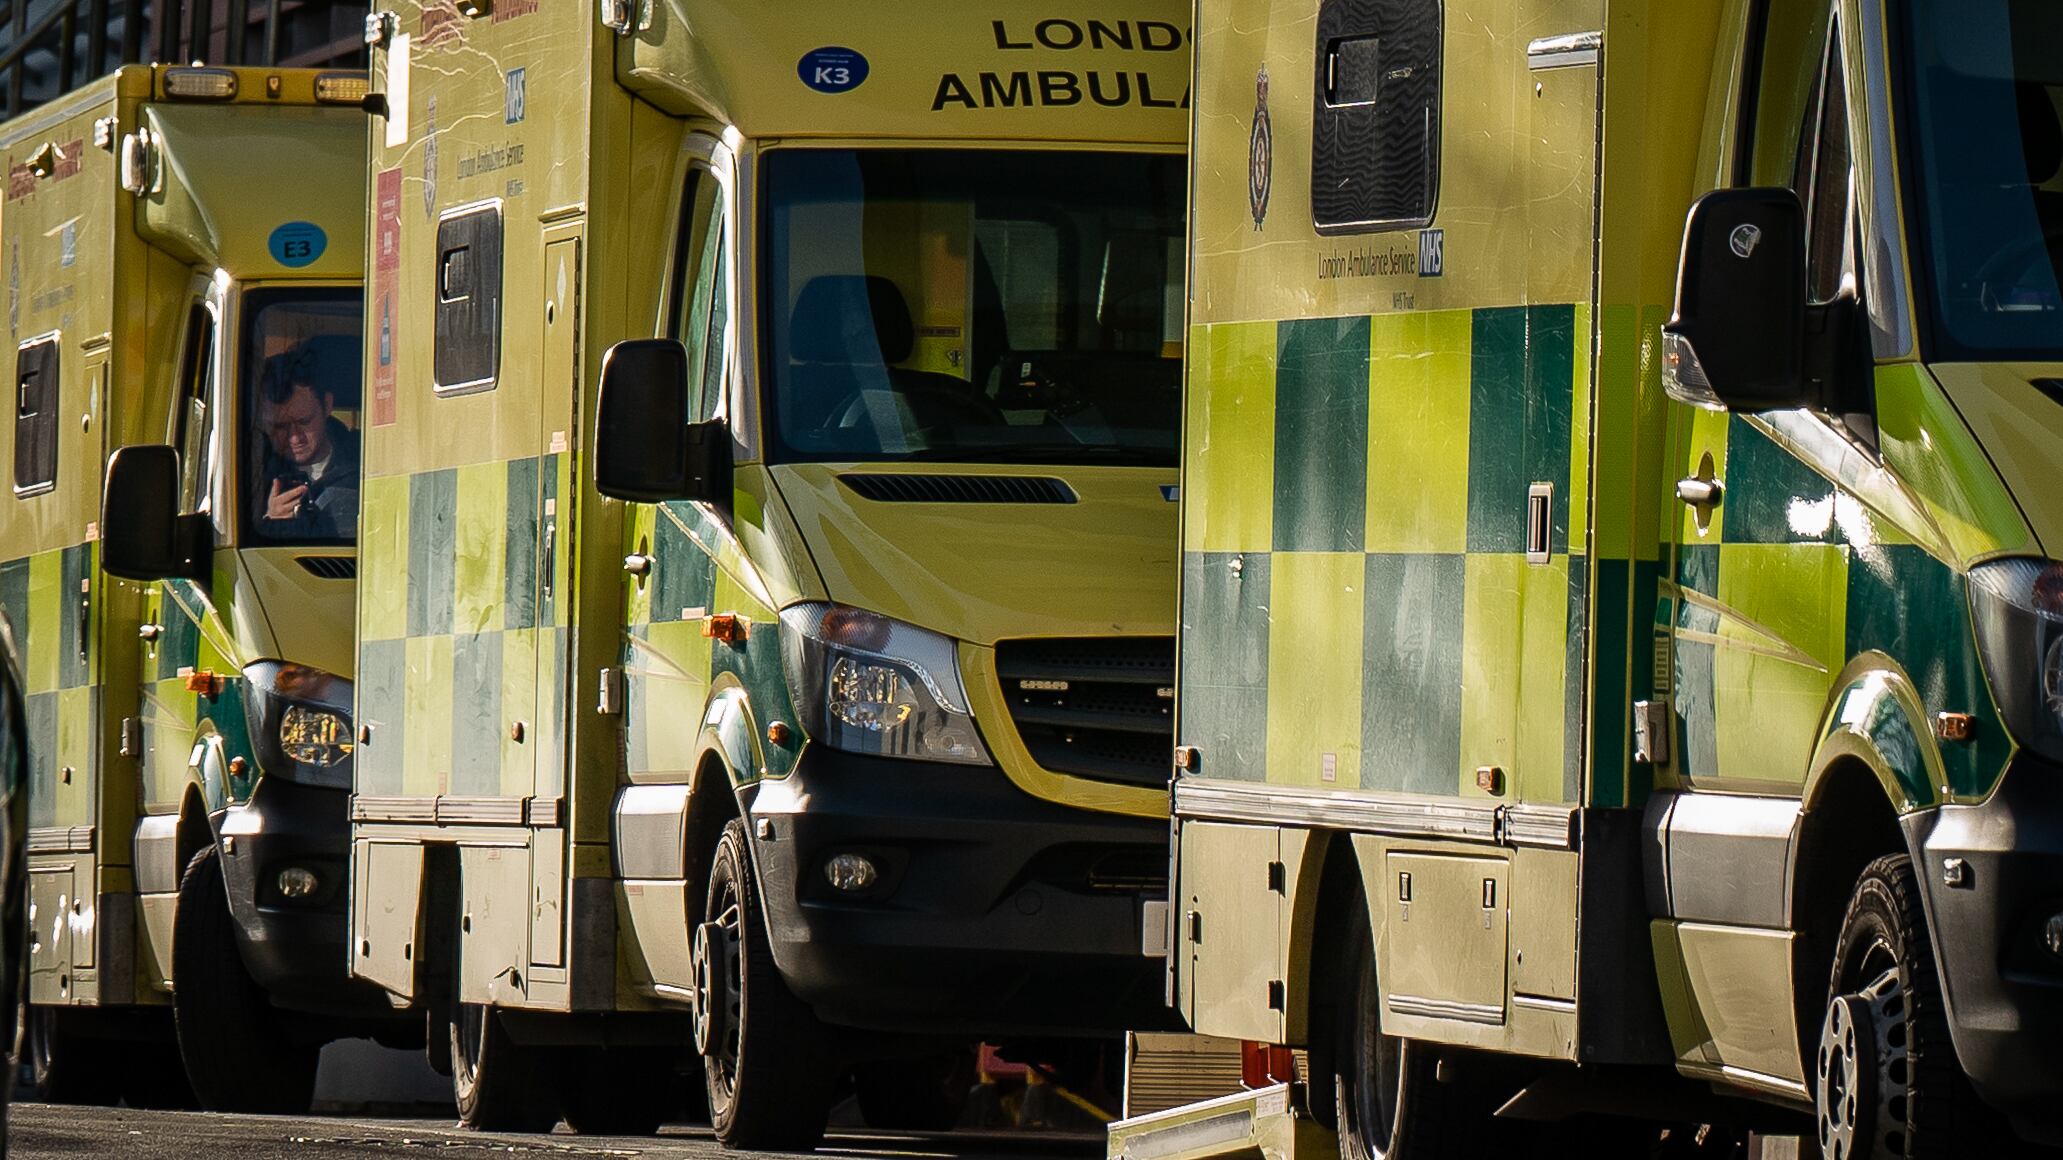 Ambulance response times in England have improved, according to the latest NHS performance figures